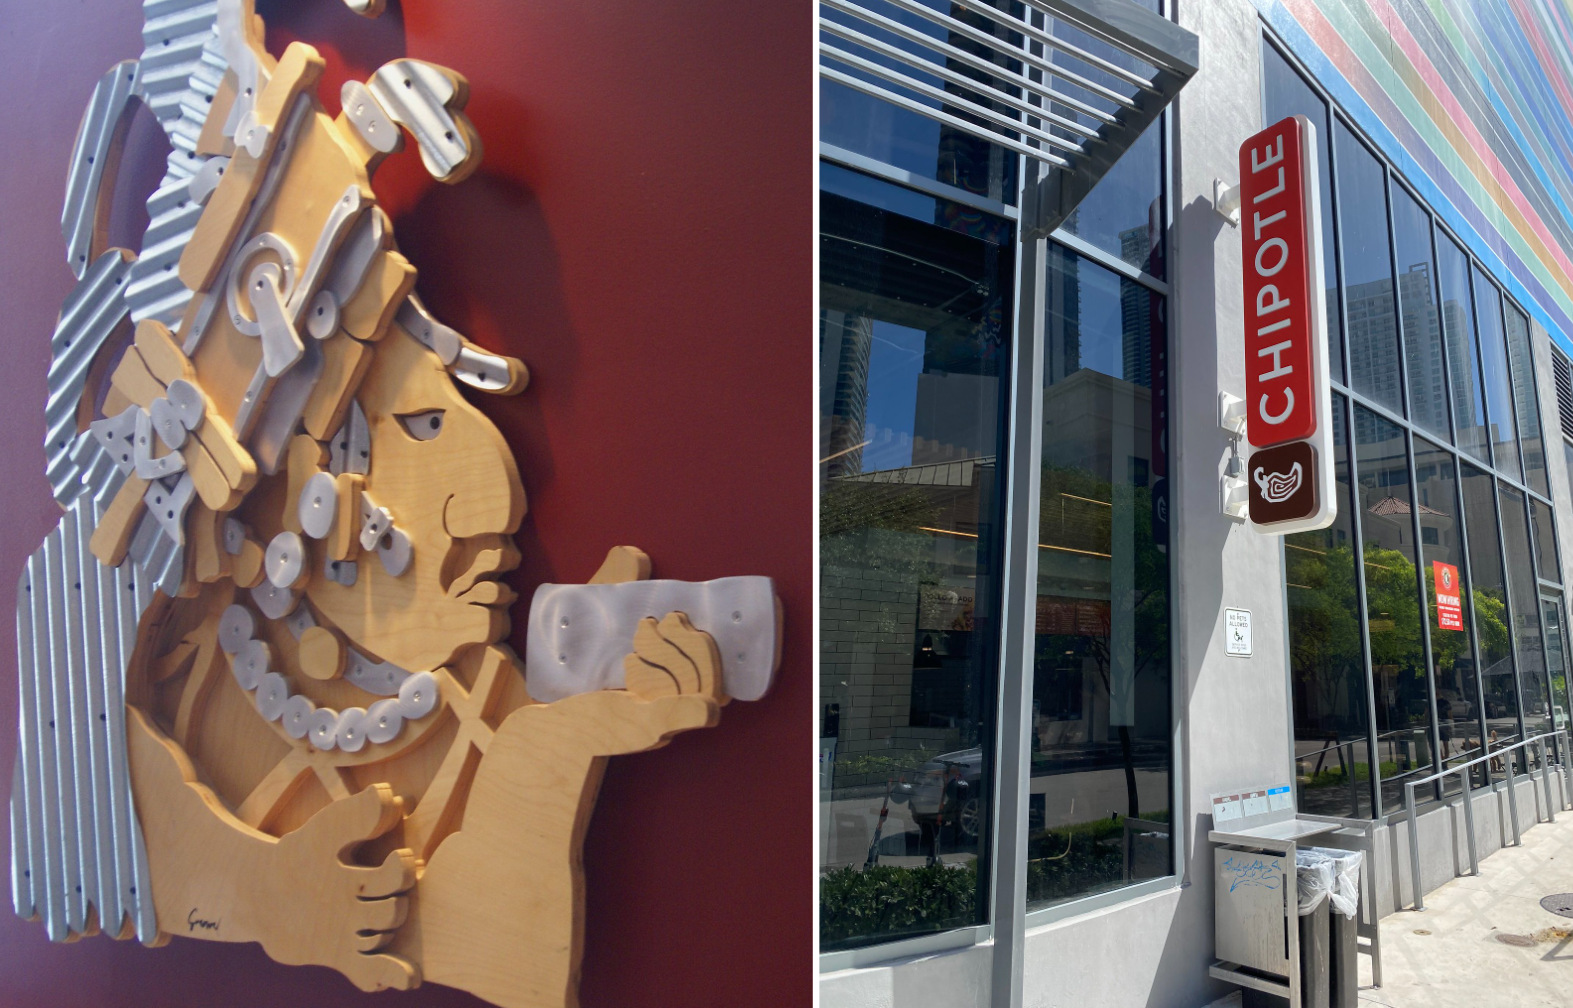 A Mayan character at a Chipotle in Burbank, CA (left). A Chipotle in Brickell, FL (right). 